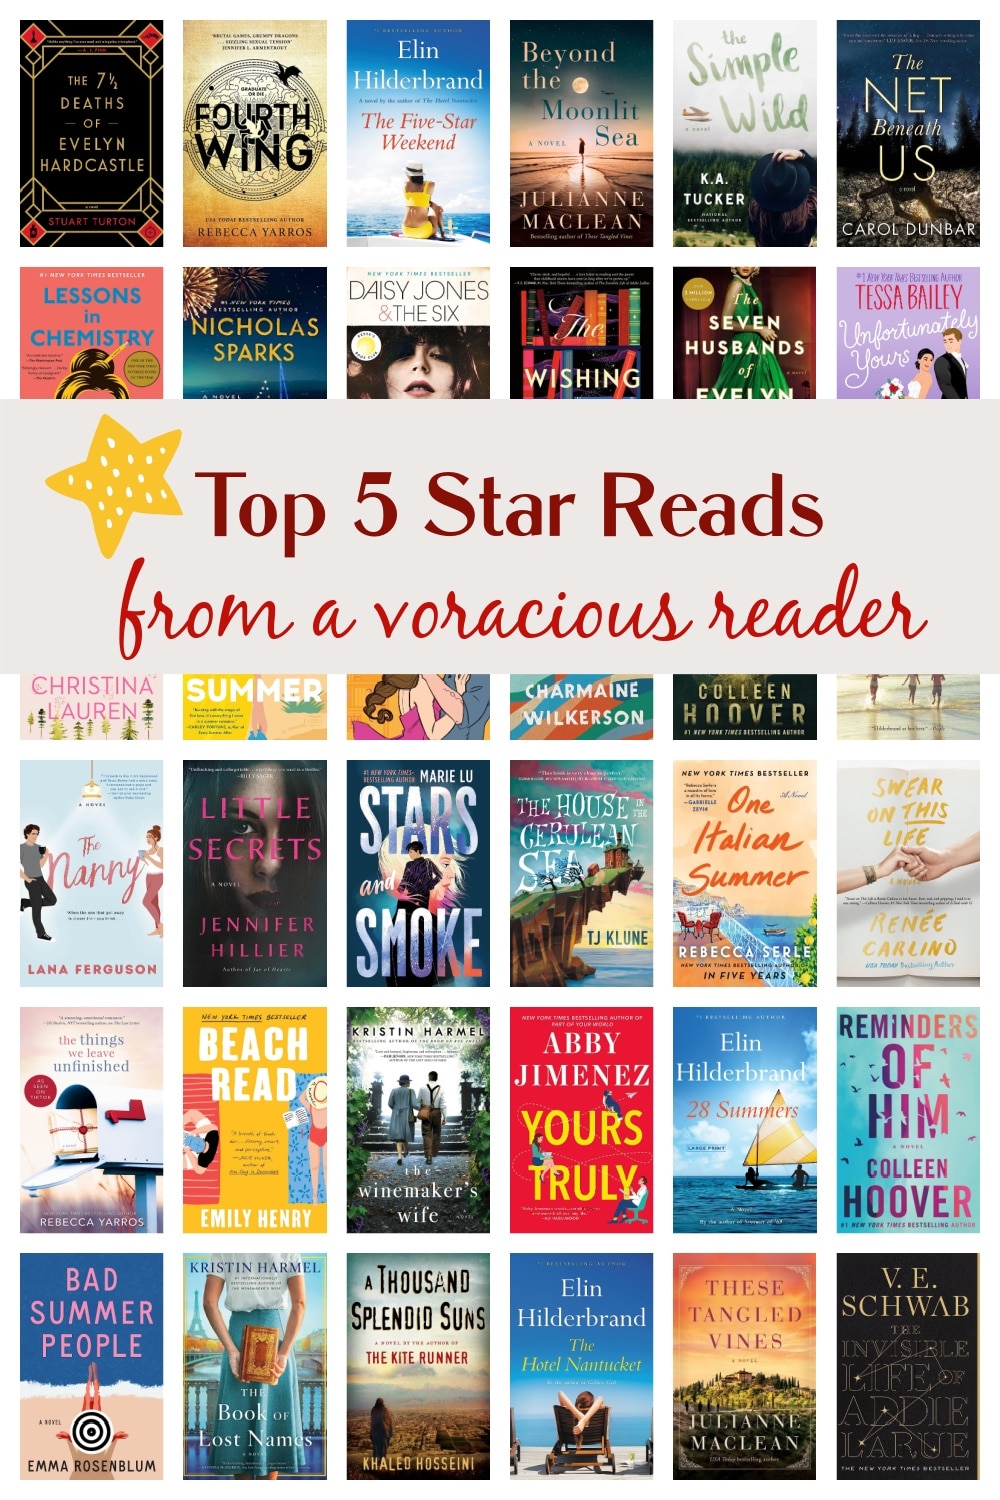 In the past sixteen months, I've devoured over ninety books spanning various genres. These are my absolute favorites, all deserving of a solid five-star rating. I highly recommend them to you and hope you find a few you love just as much. via @cmpollak1